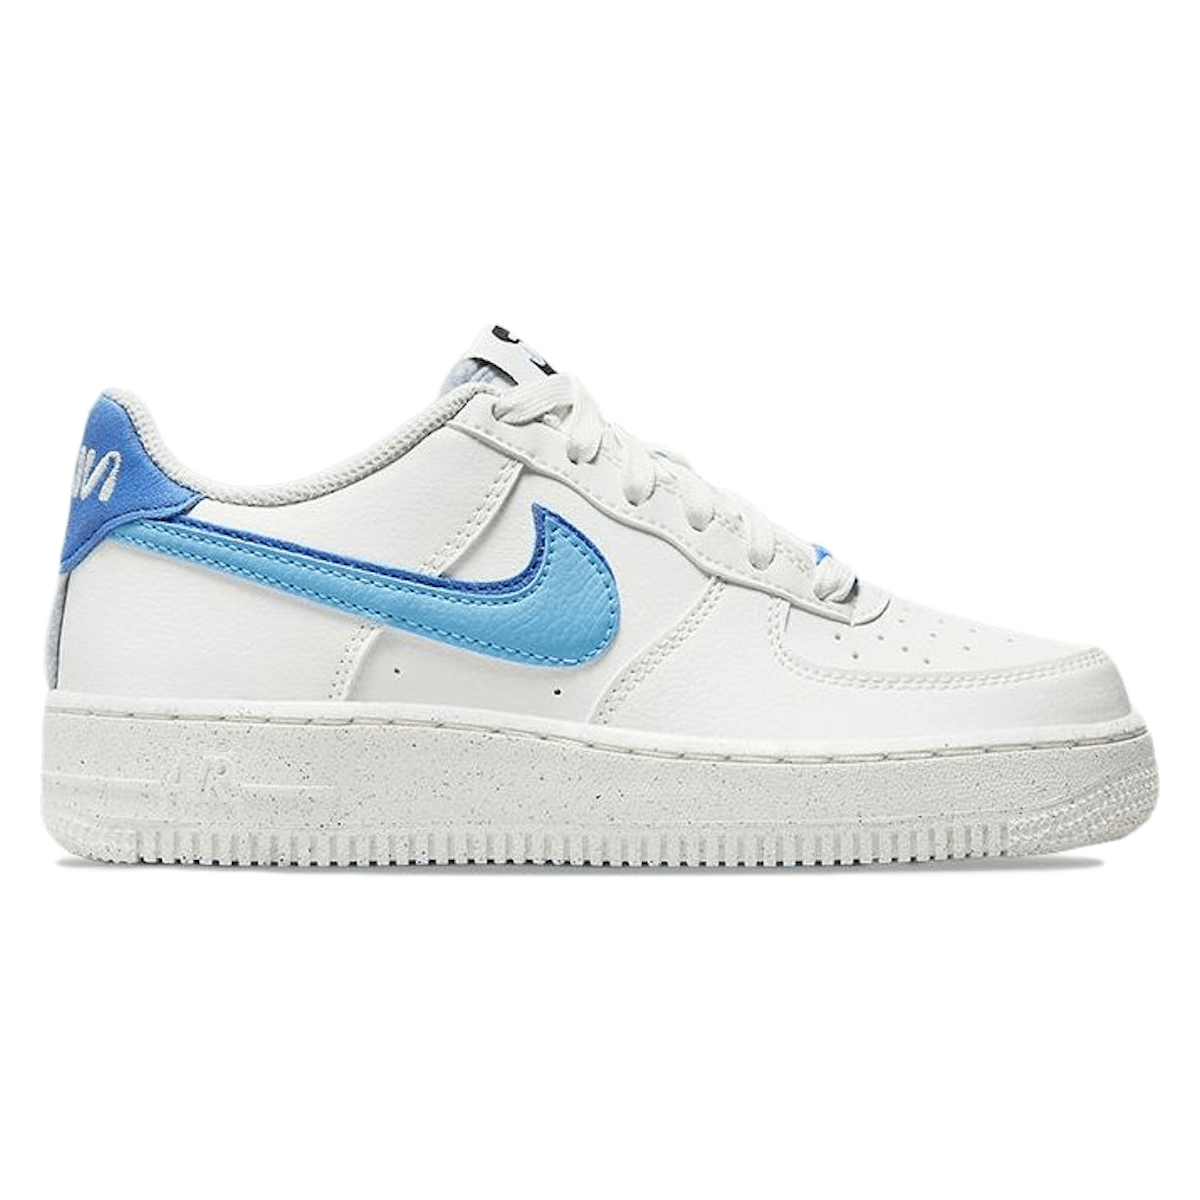 Nike Air Force 1 Low 82 Double Swoosh White Medium Blue (GS)